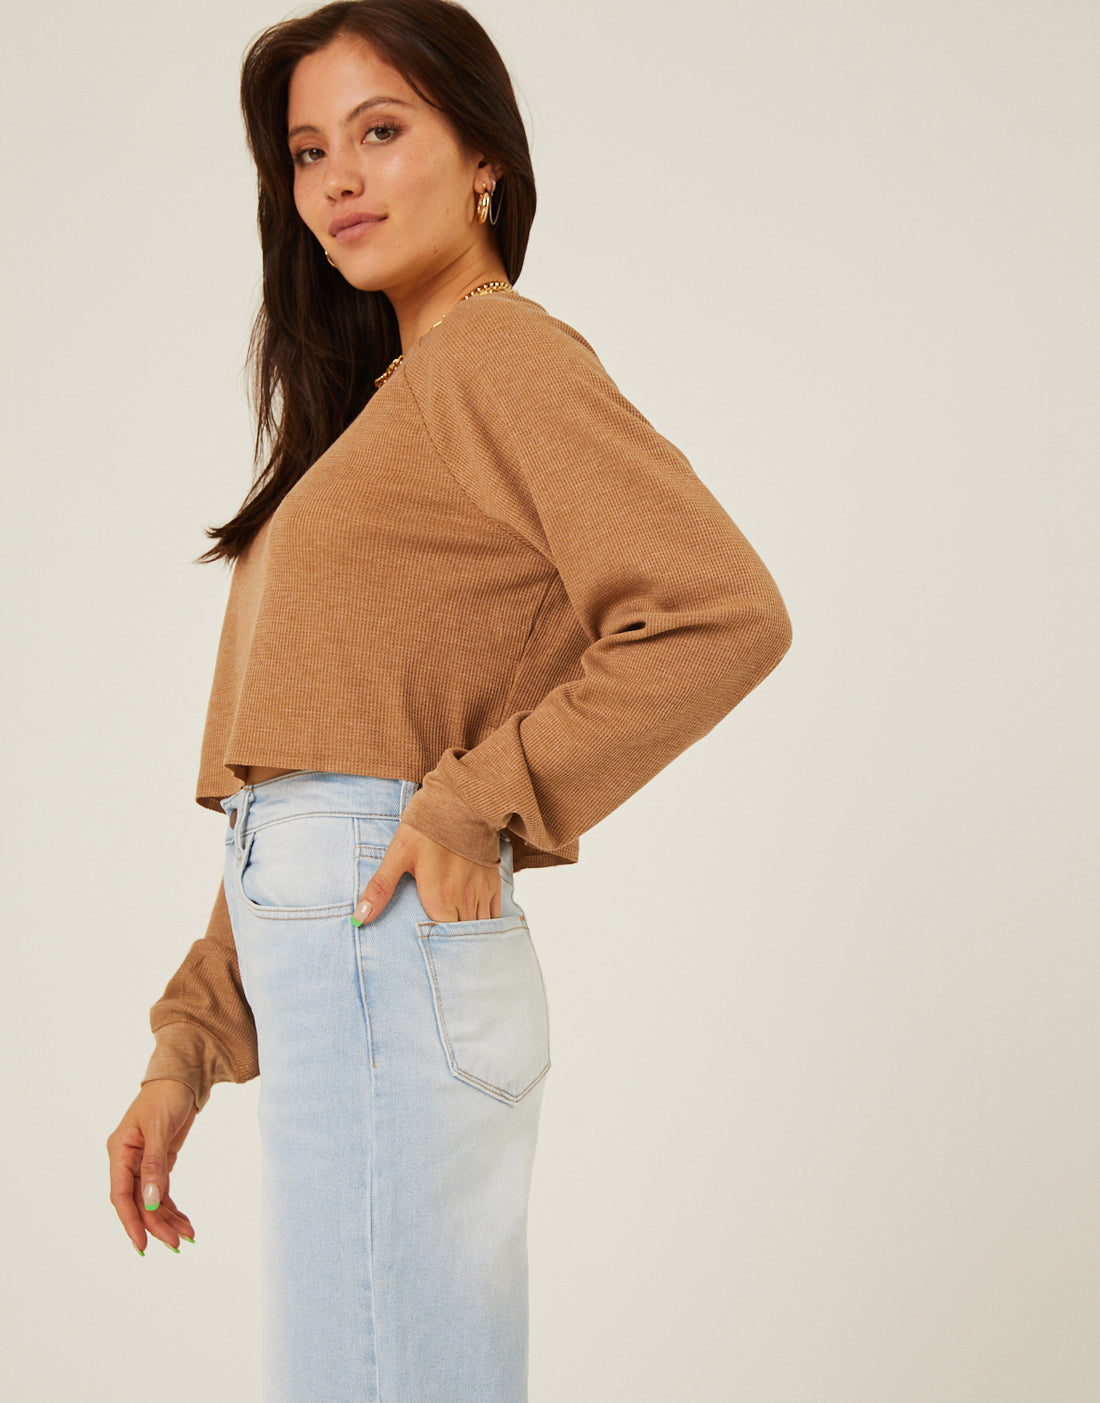 Long Sleeve Cropped Thermal Top Tops -2020AVE